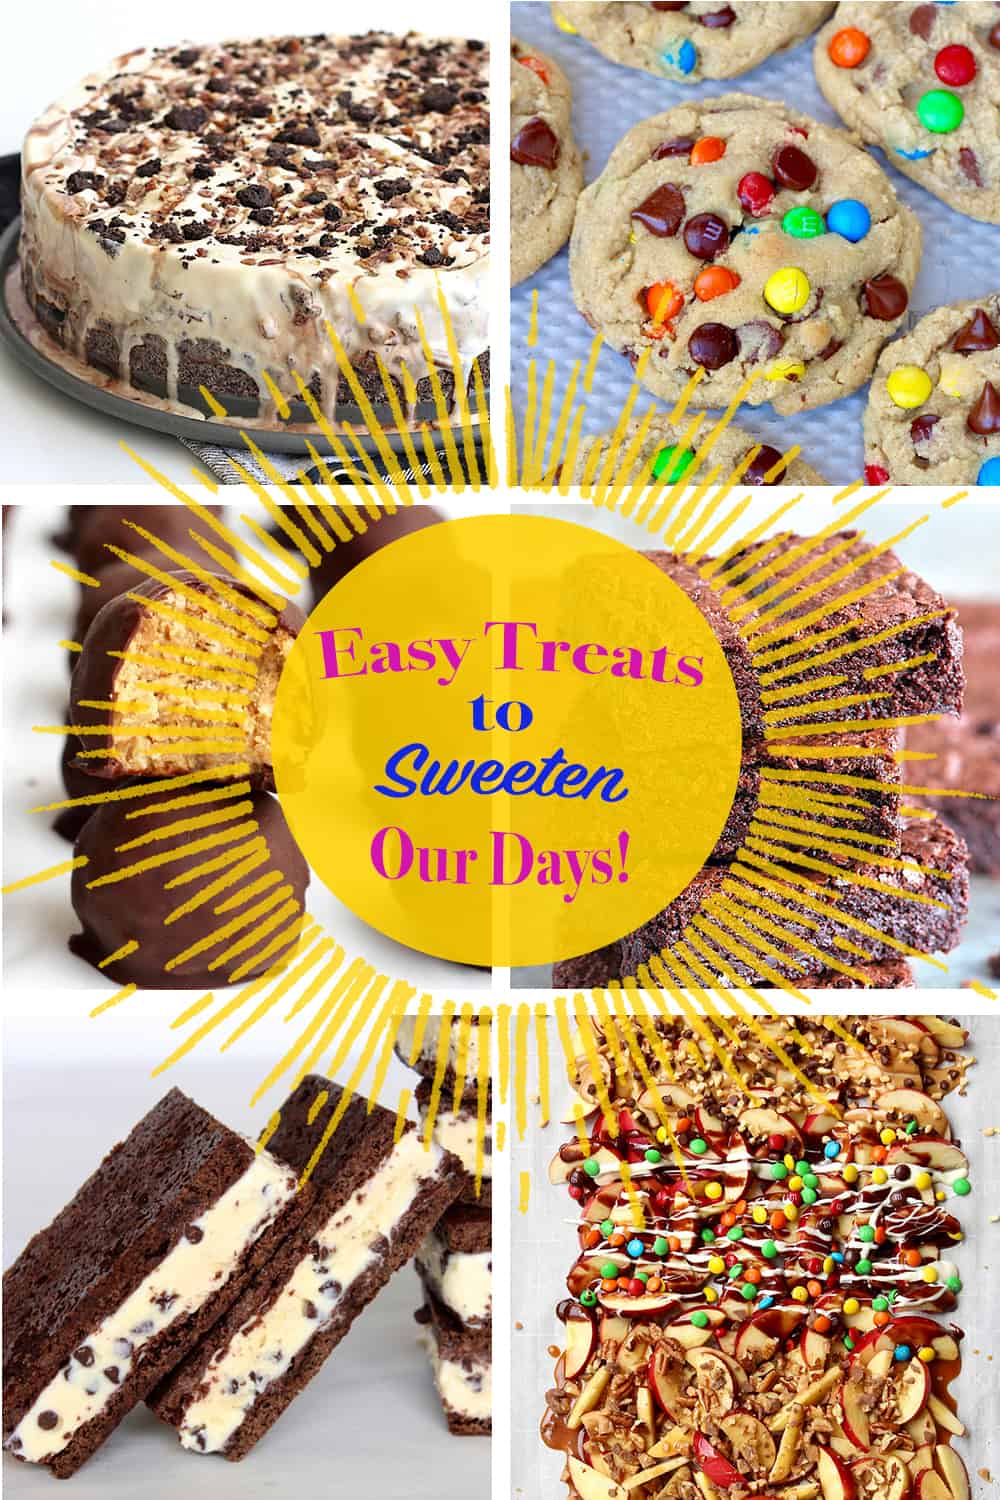 Easy Treats to Sweeten Our Days